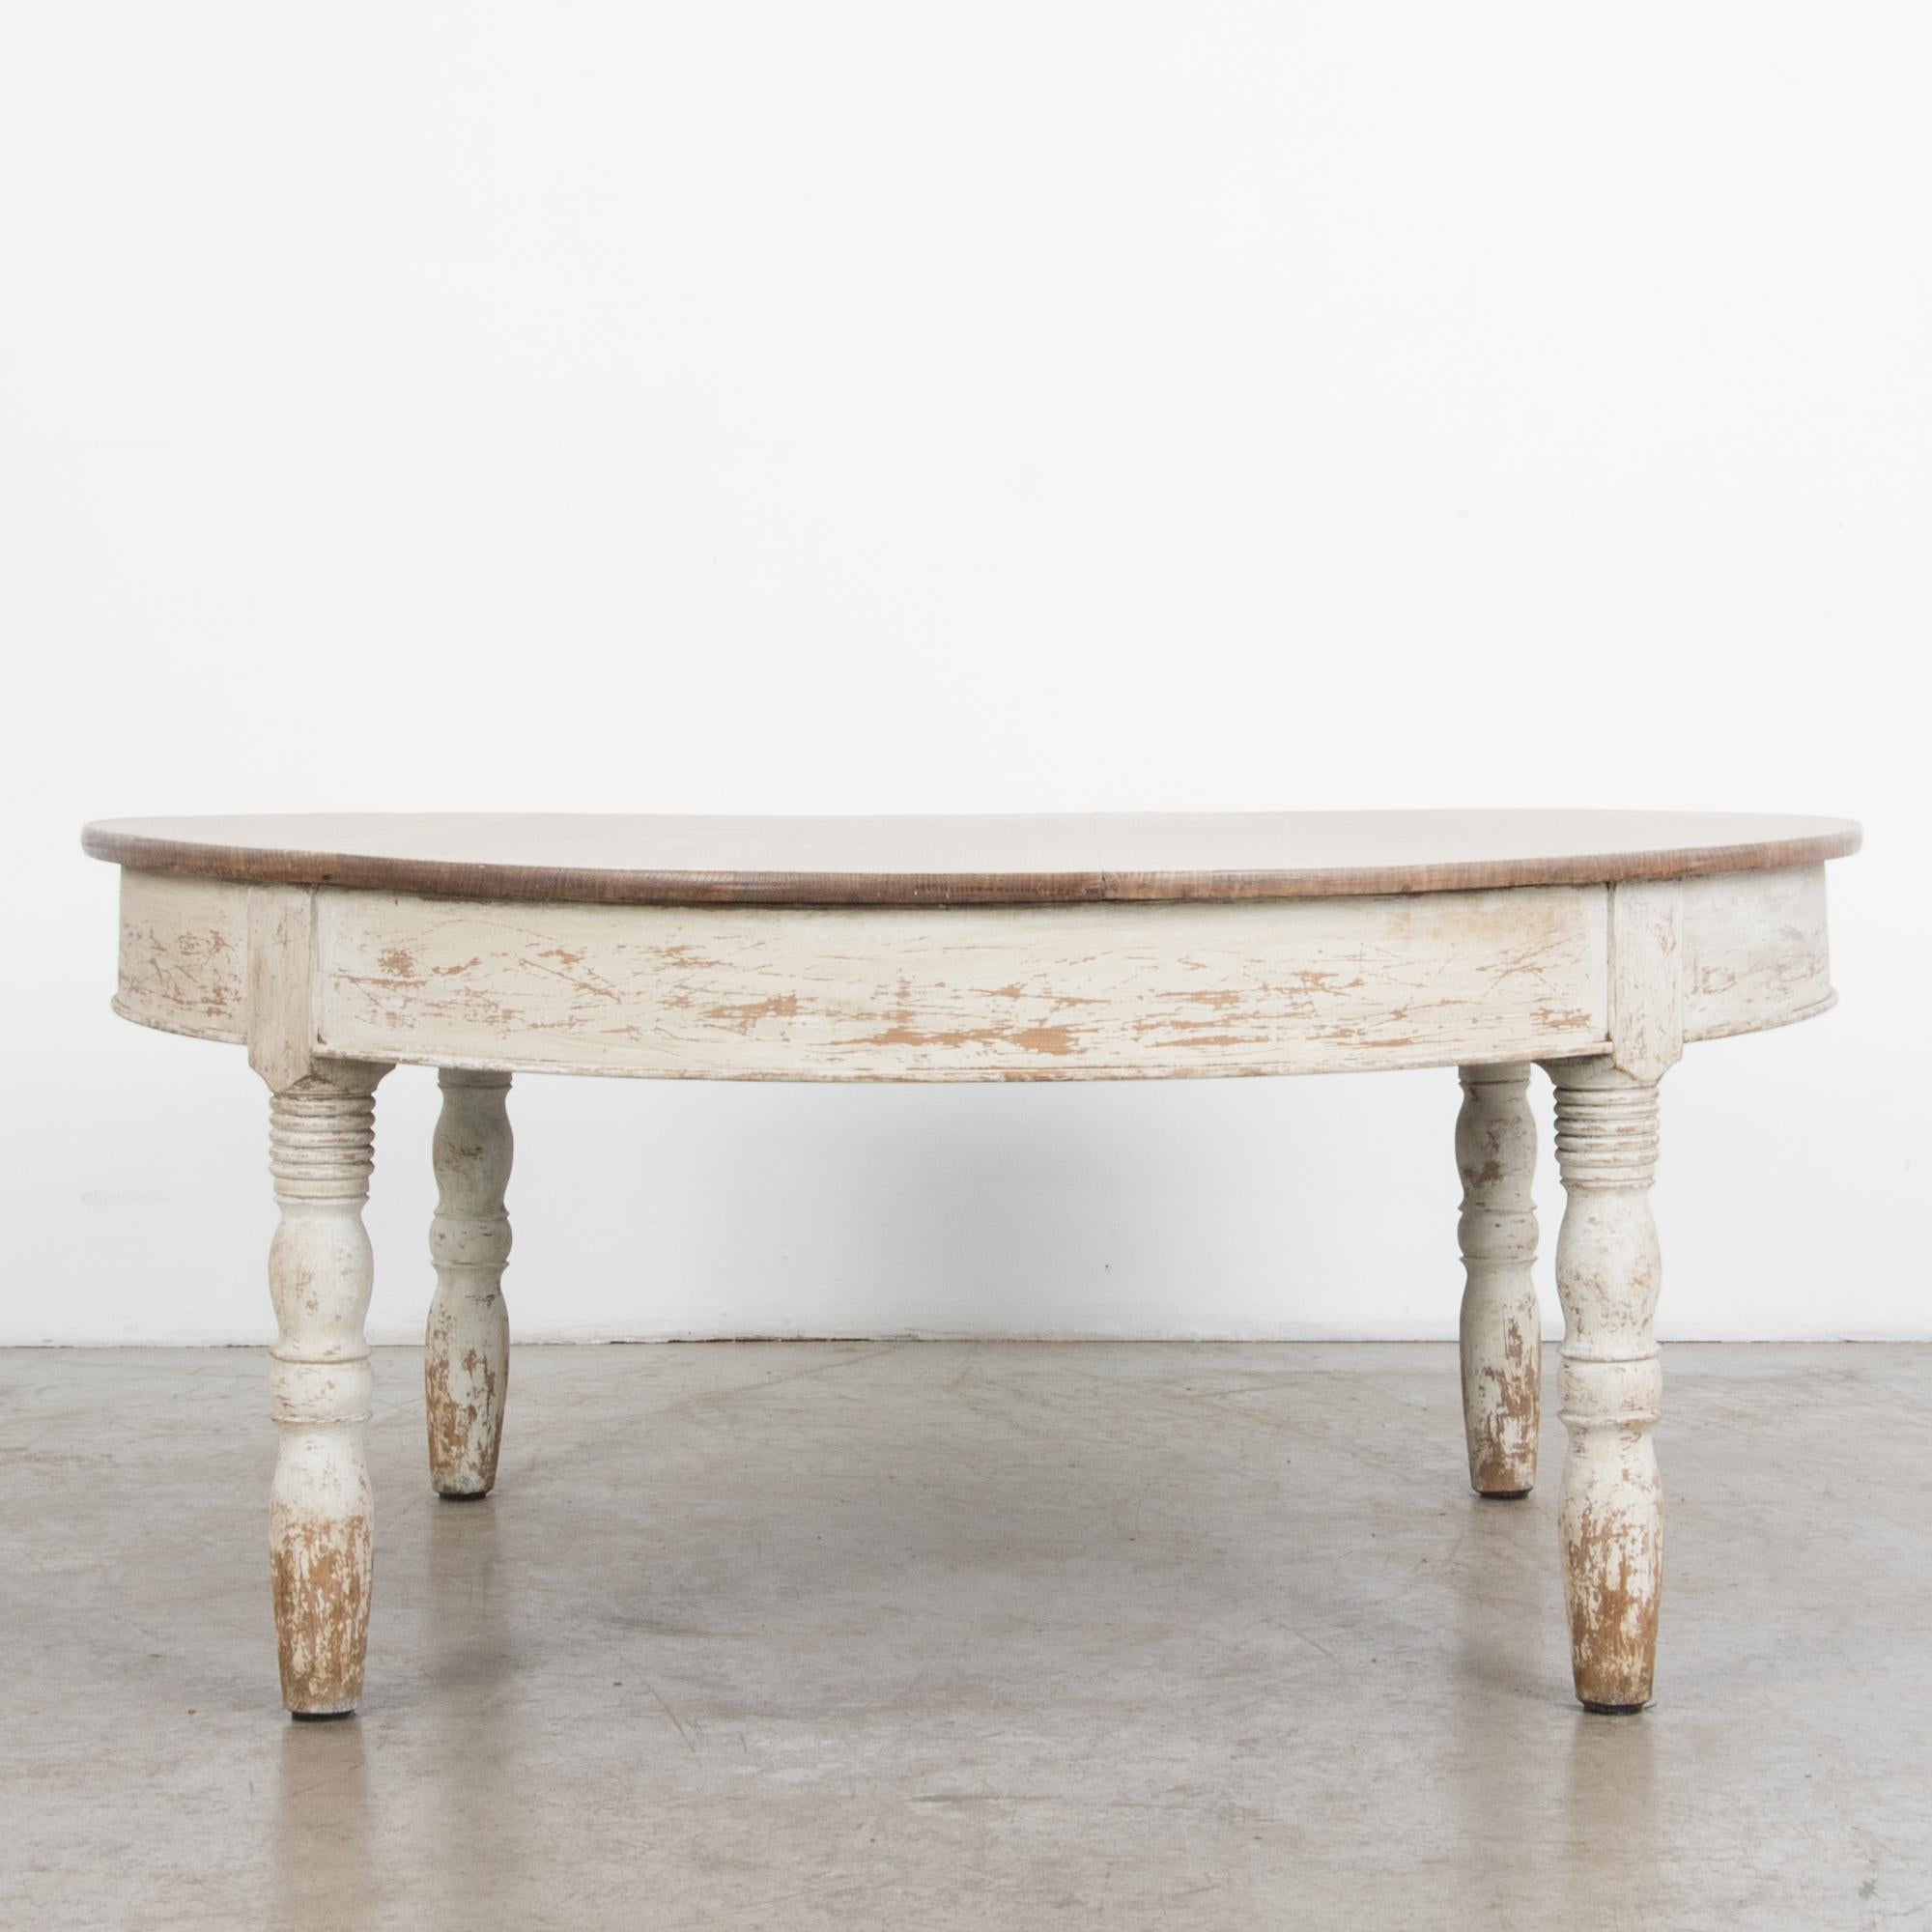 A simple oak table from France, circa 1900. Traditional construction borrows
from the lineage of European craftsmanship, with unique distressed finish. The worn patina gives suggestion of time and history, with a timeless shape and subtle